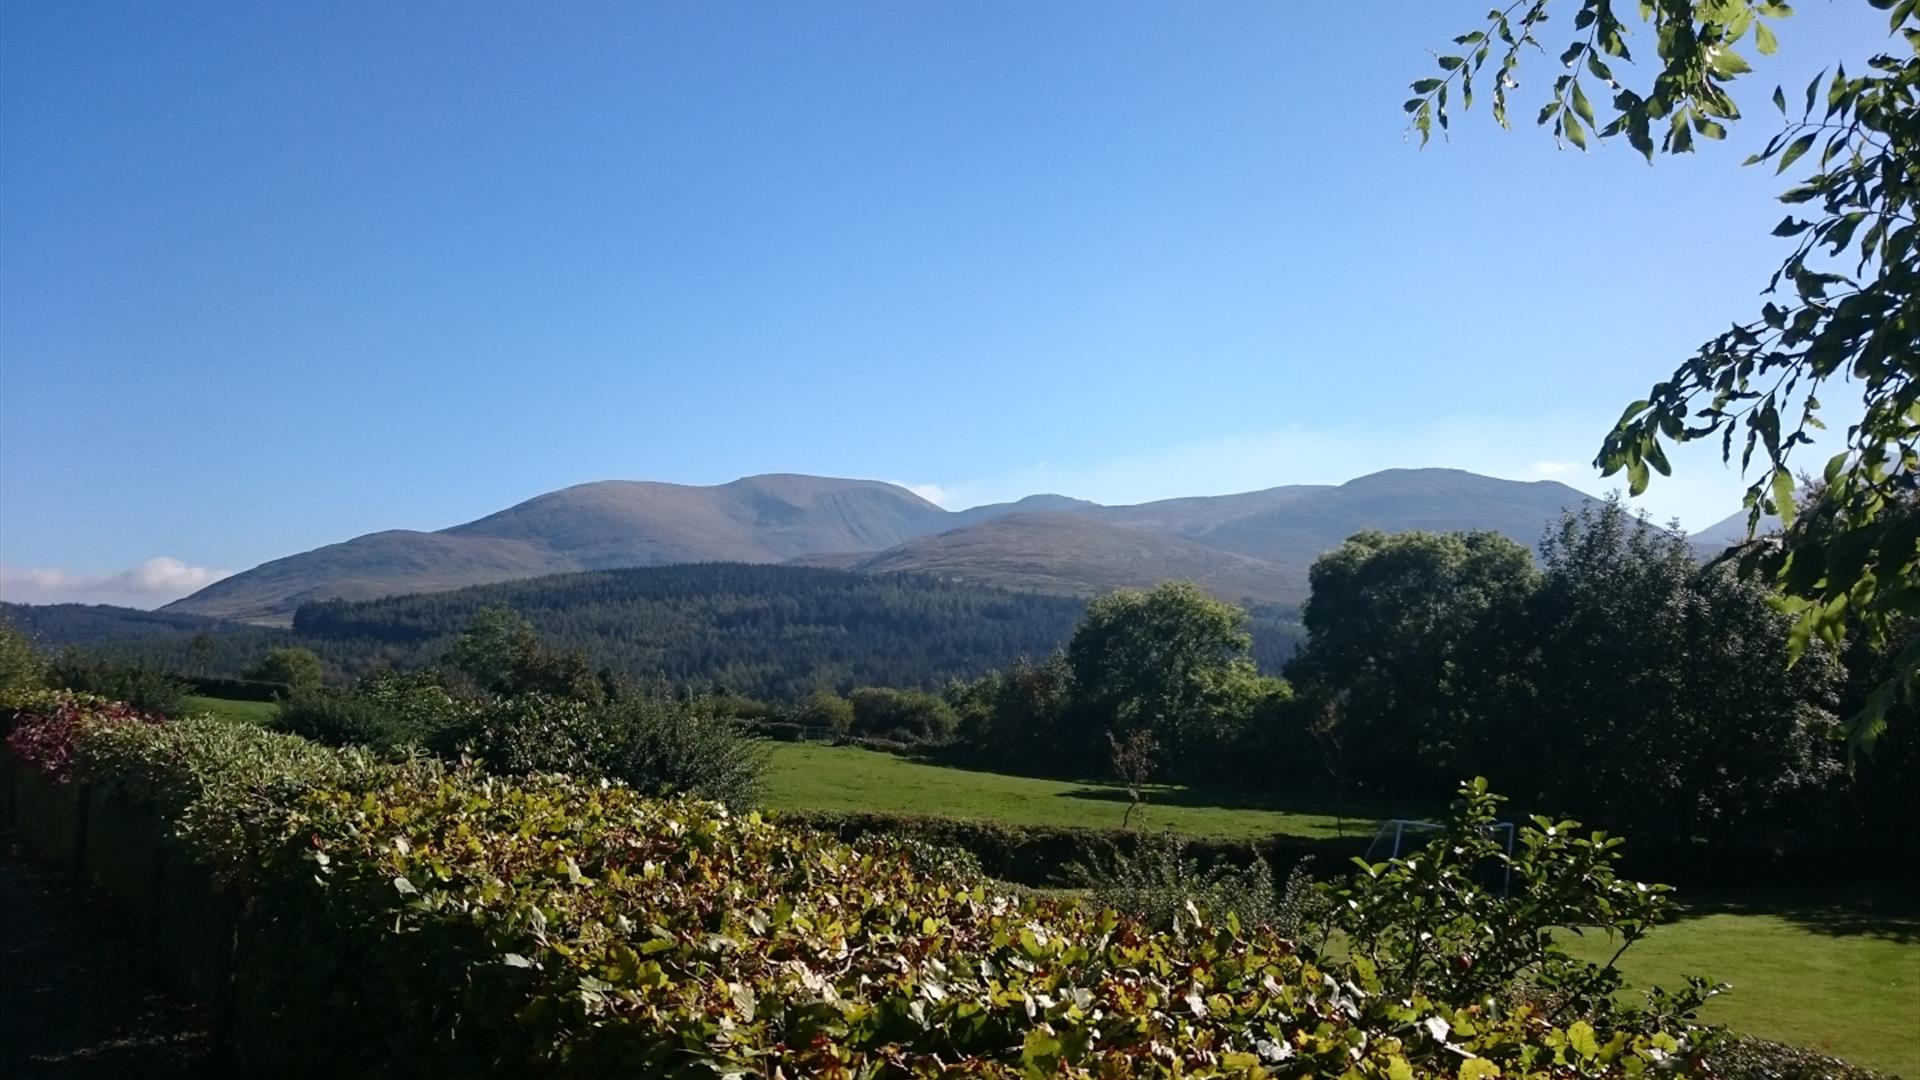 View from Kilcoo to Mourne Mountains